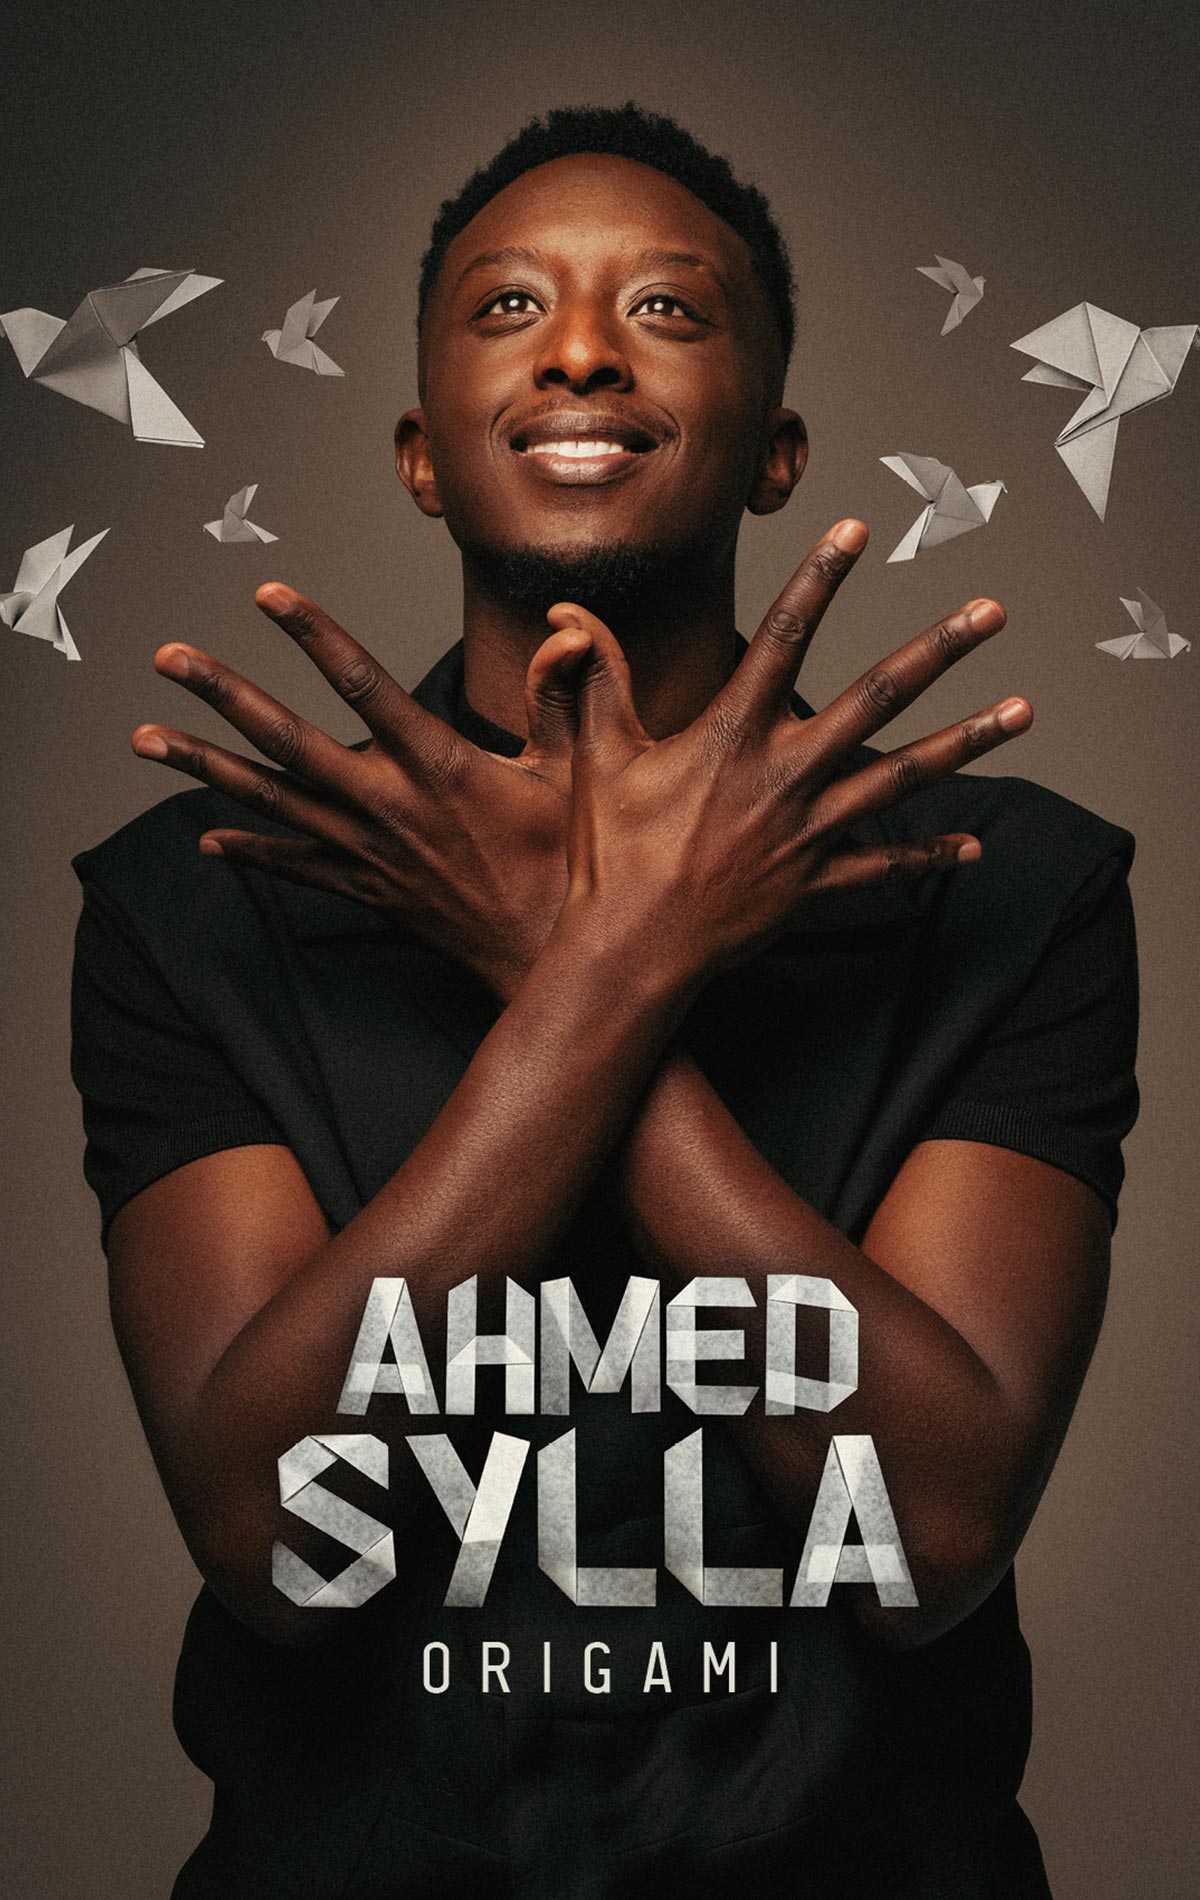 Ahmed Sylla at Le Forum Liege Tickets